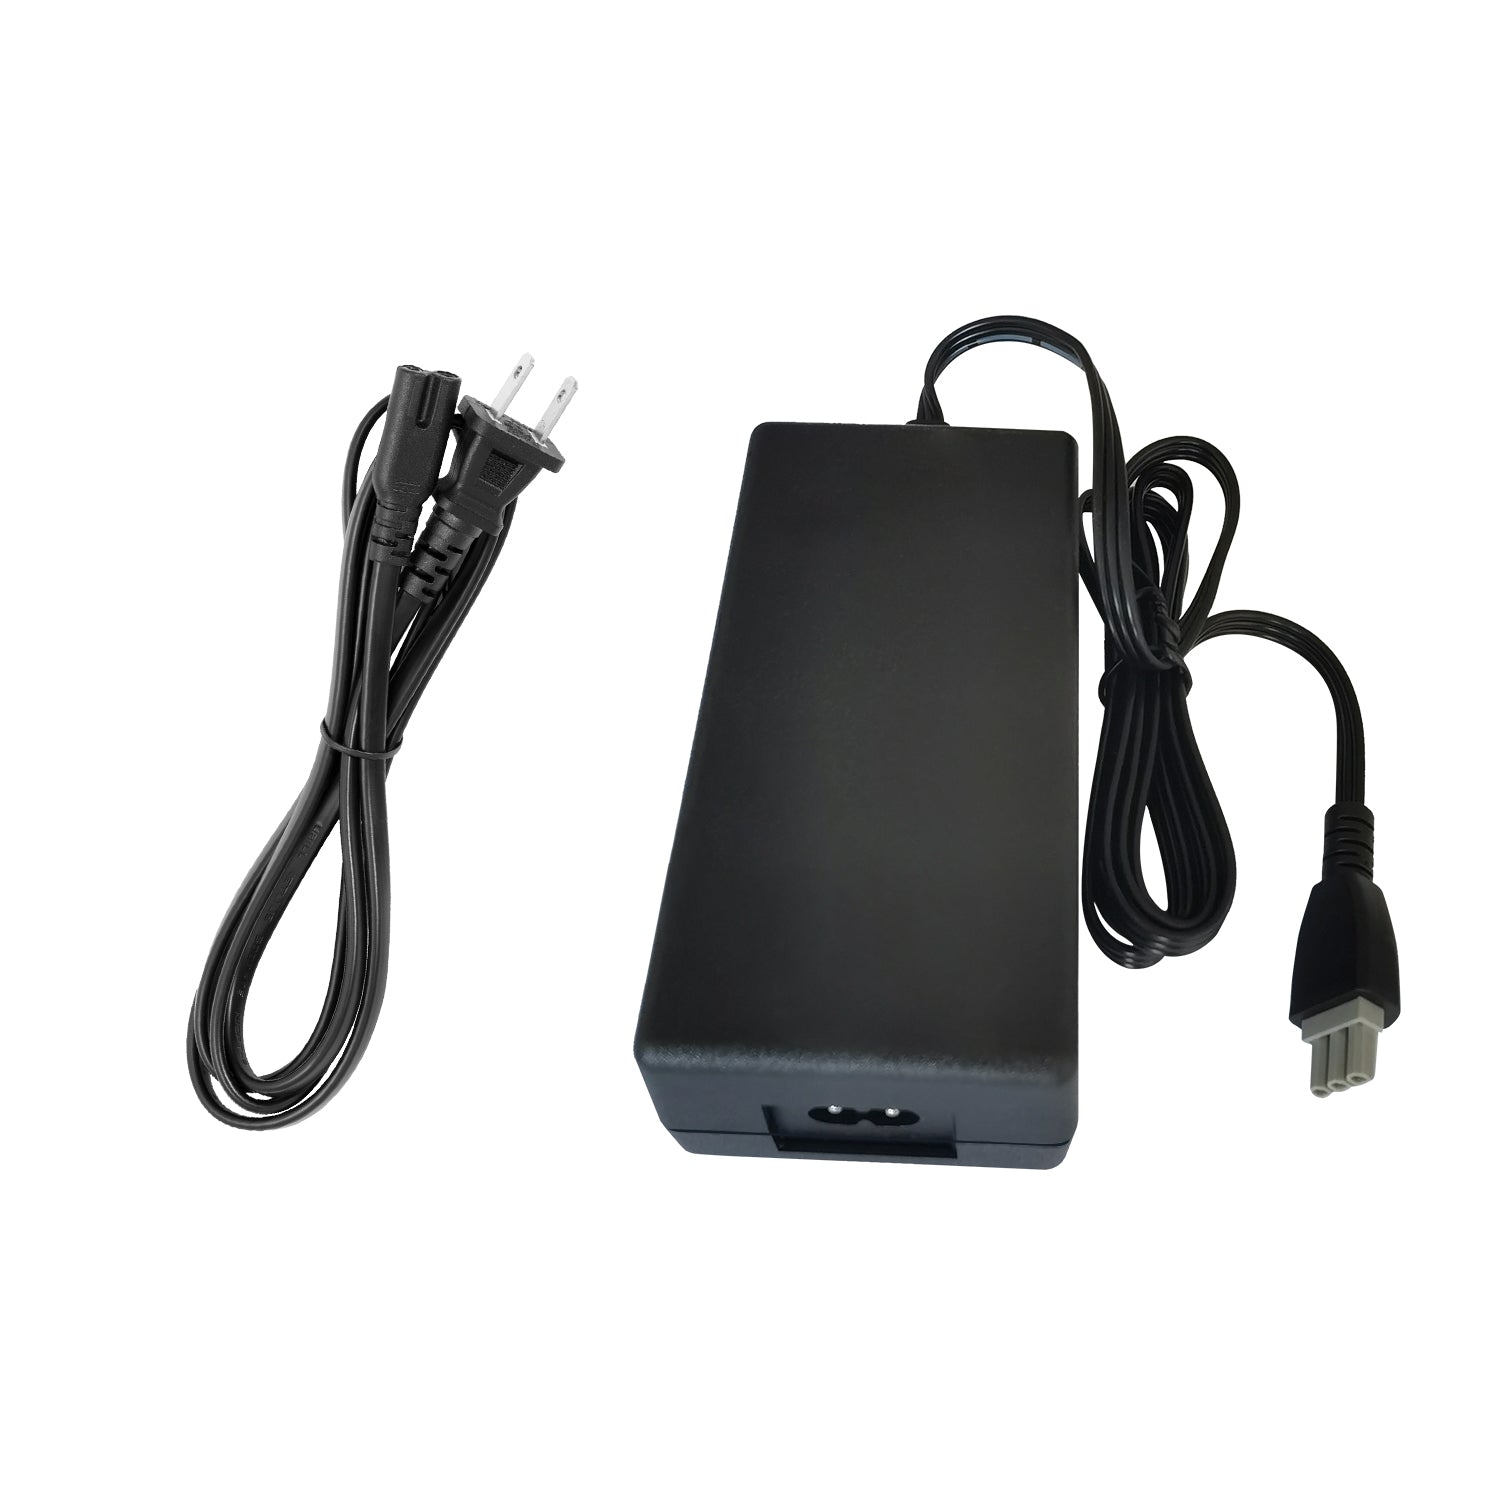 Power Adapter for hp officejet q3440a Printer.